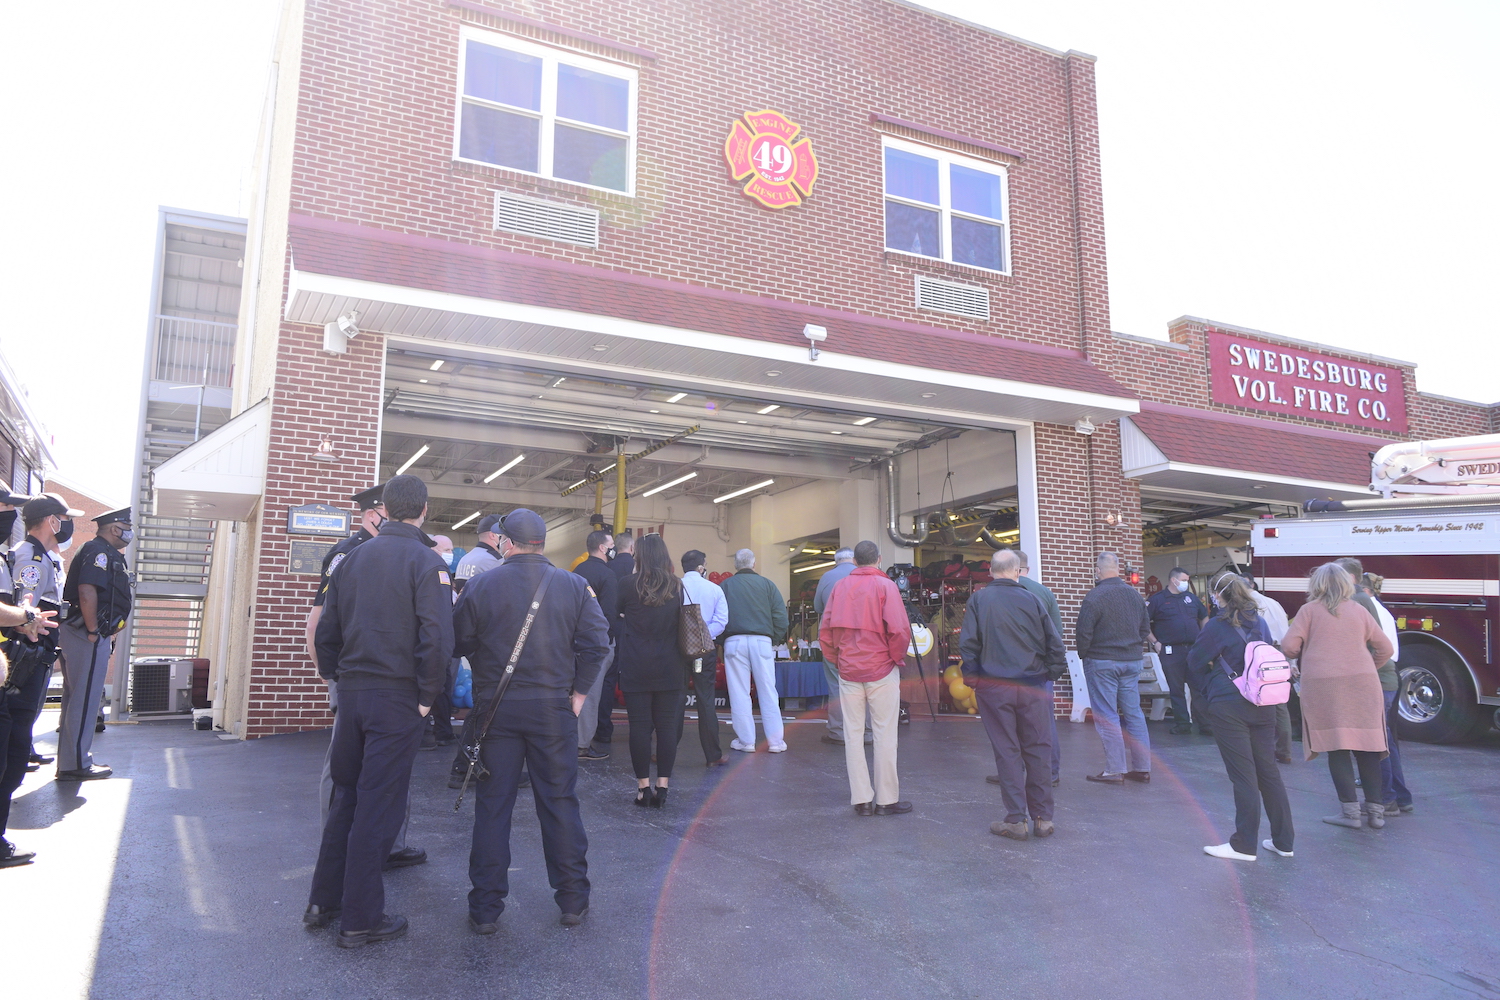 crowd of people standing outside a fire house